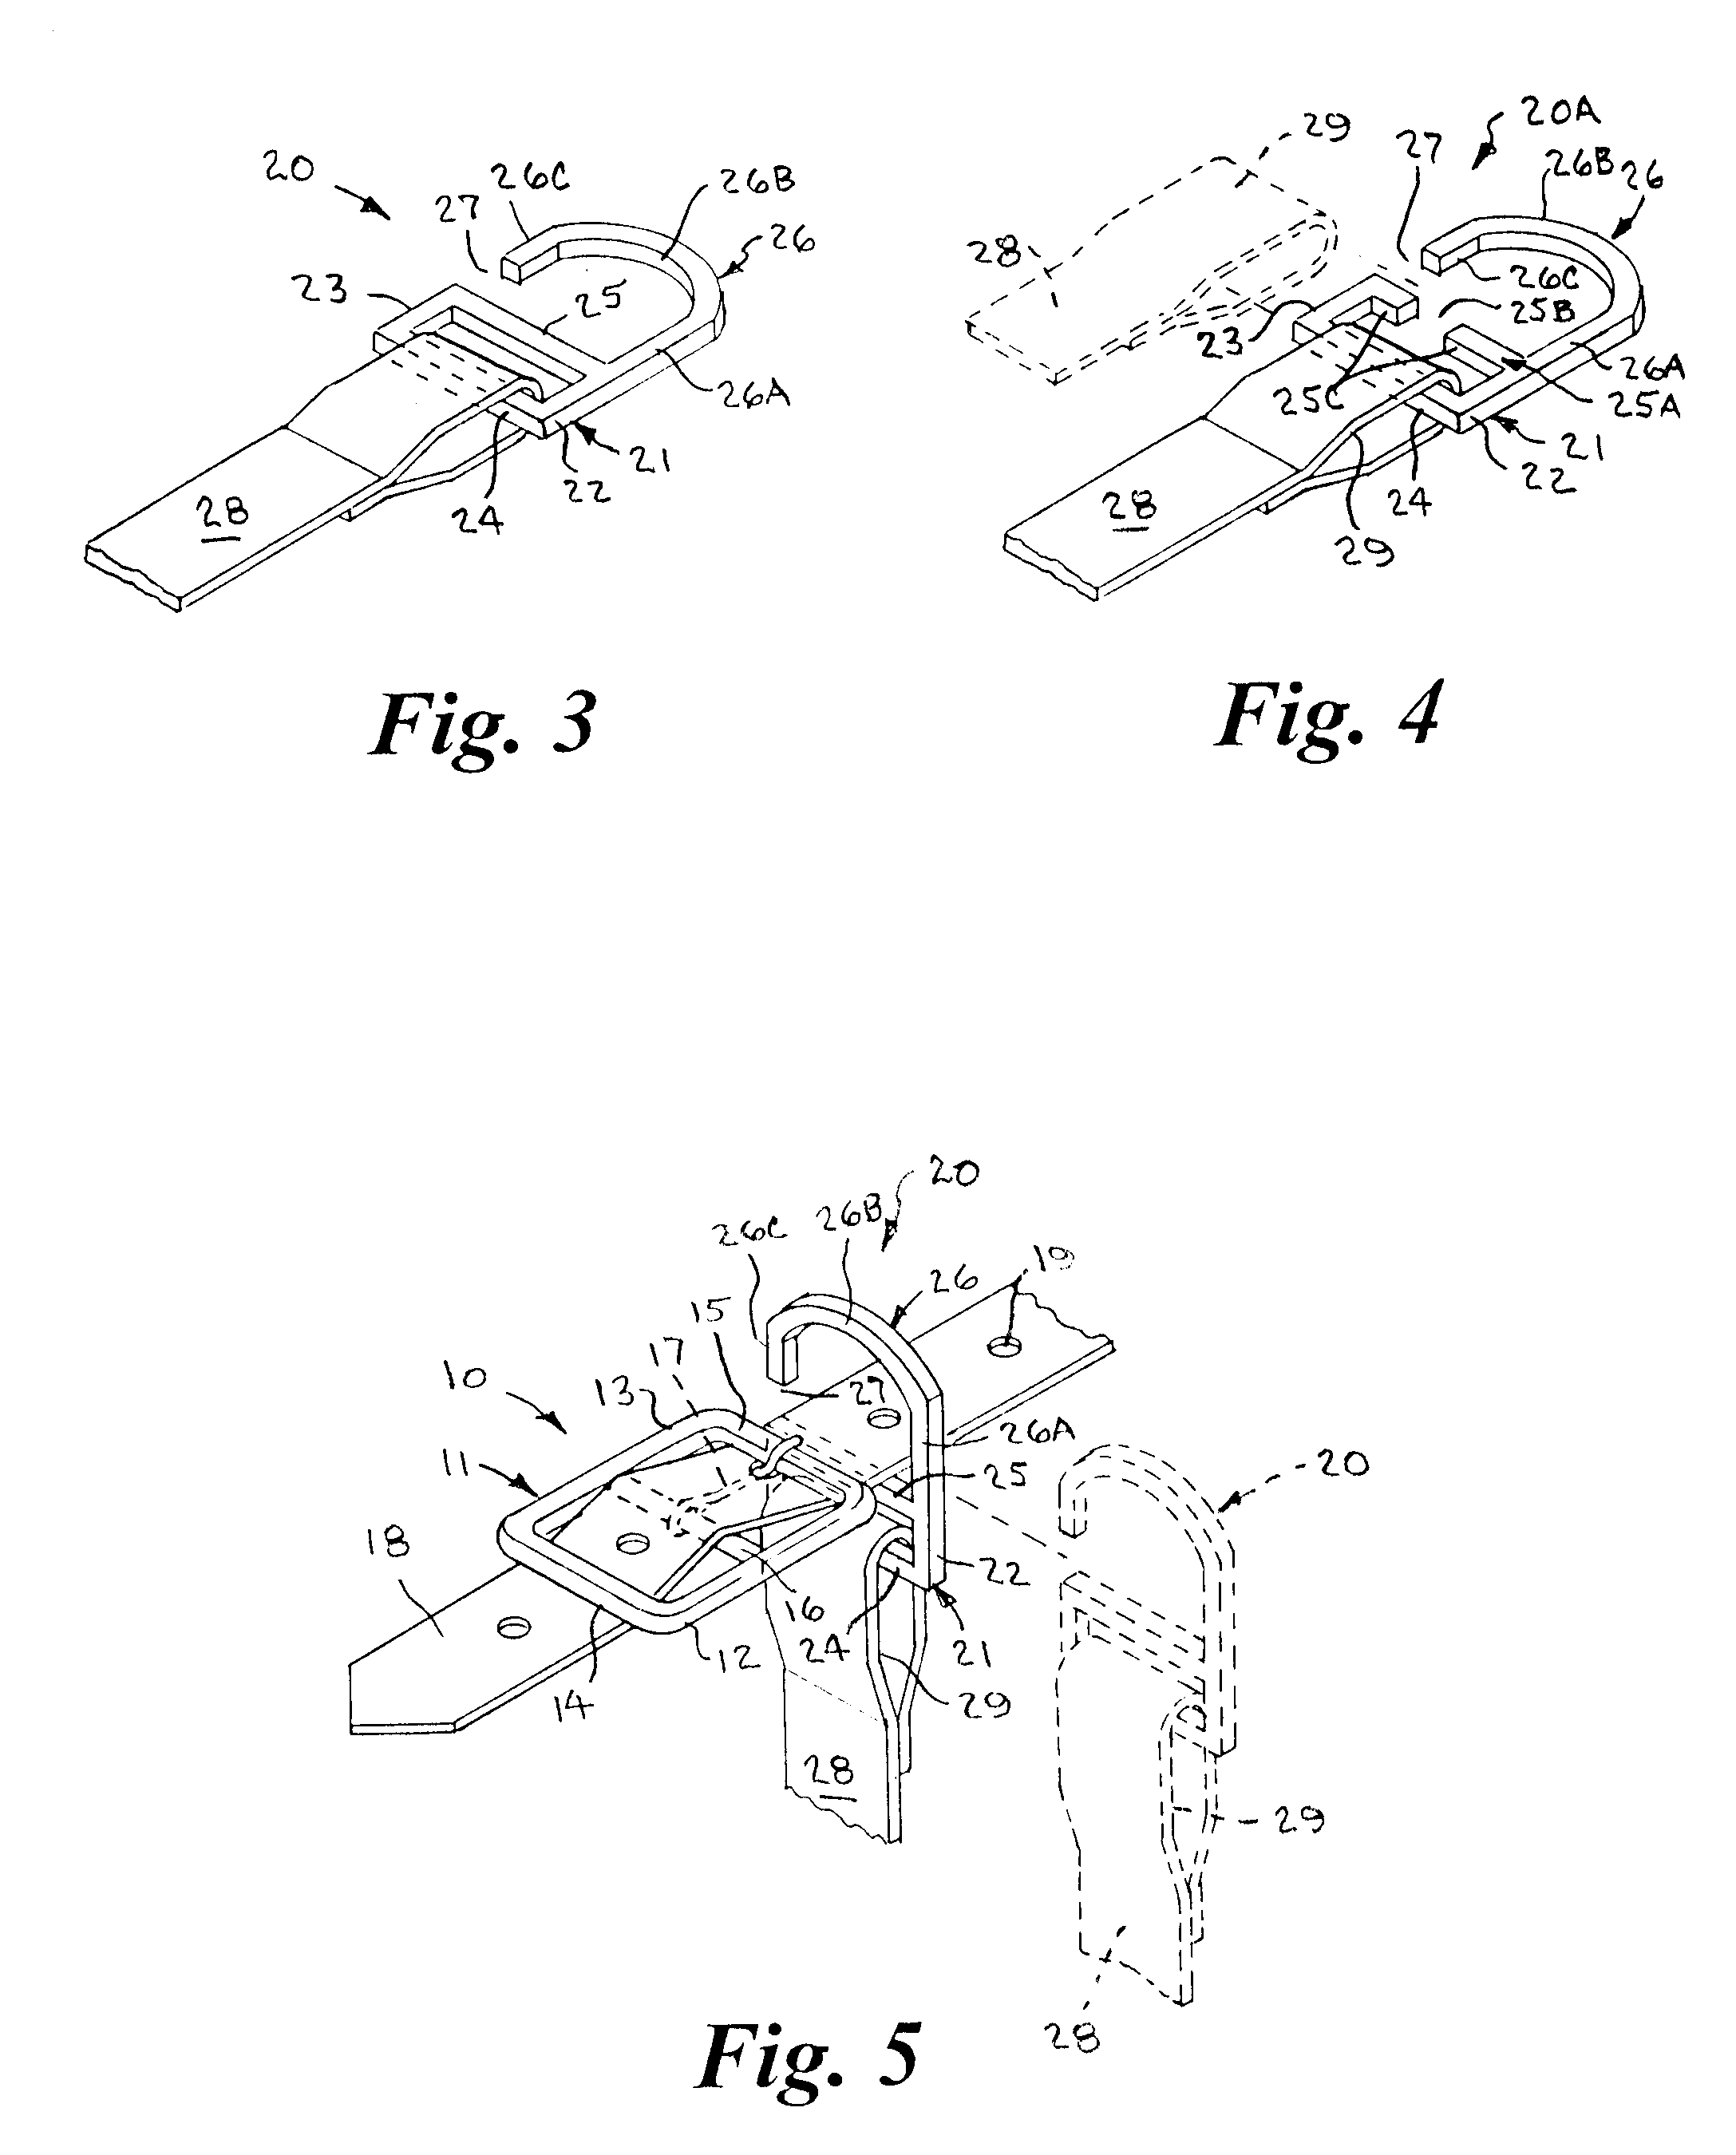 Buckle fastener system and method